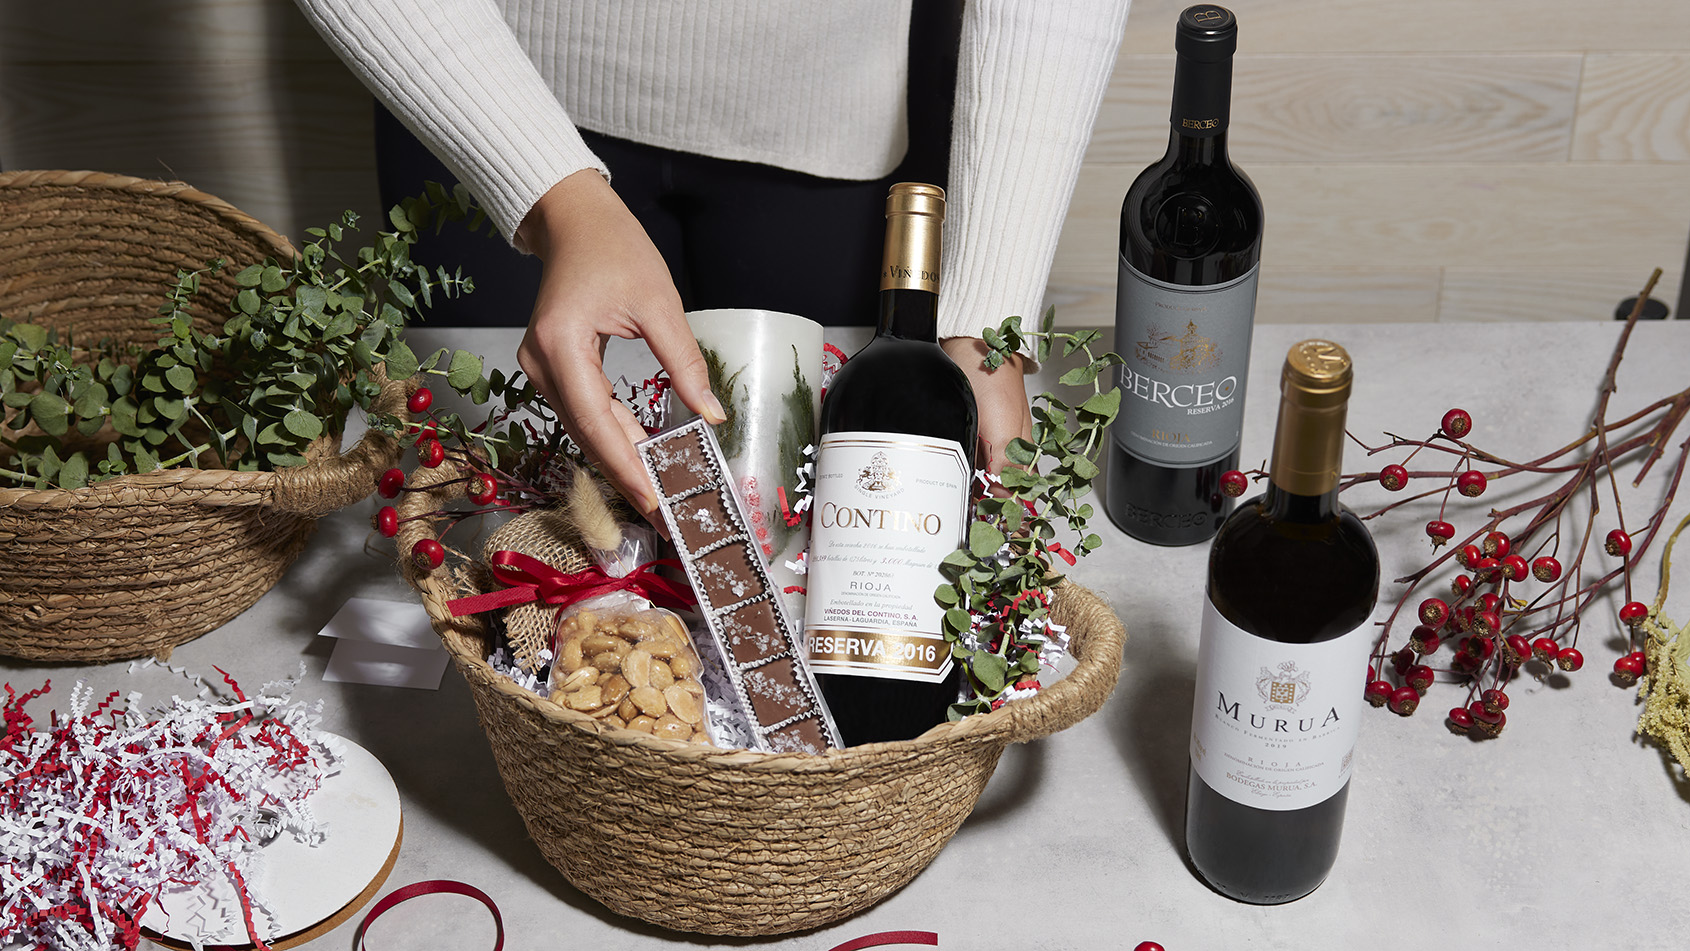 4 Ways to Gift Rioja for the Holidays